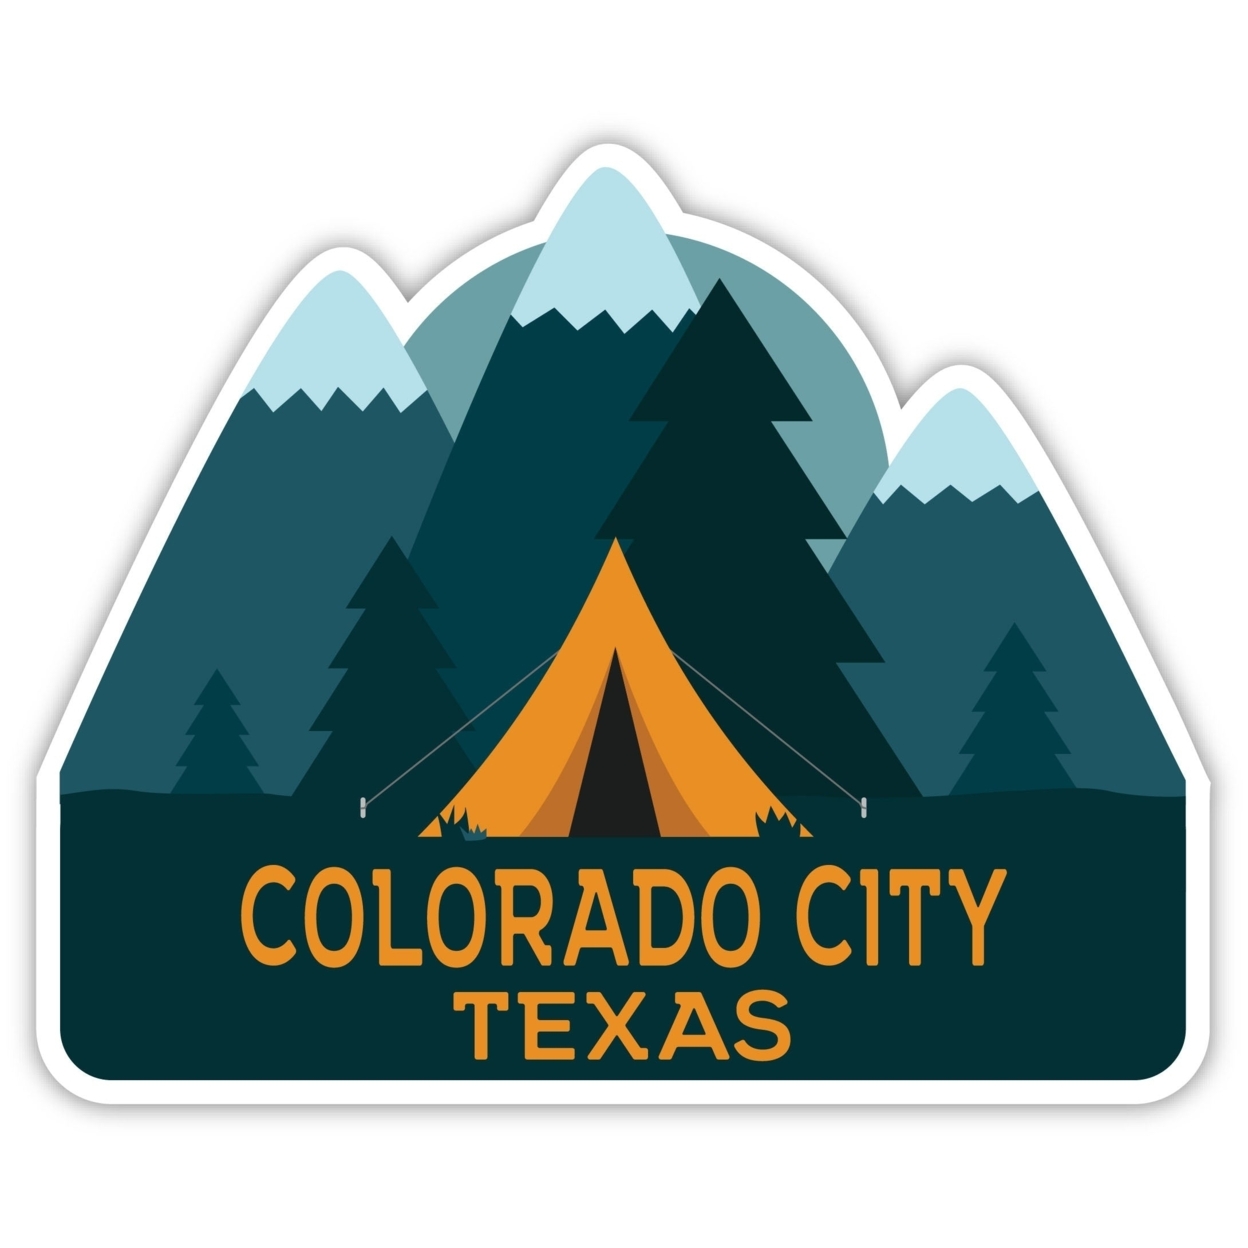 Colorado City Texas Souvenir Decorative Stickers (Choose Theme And Size) - 4-Pack, 6-Inch, Tent